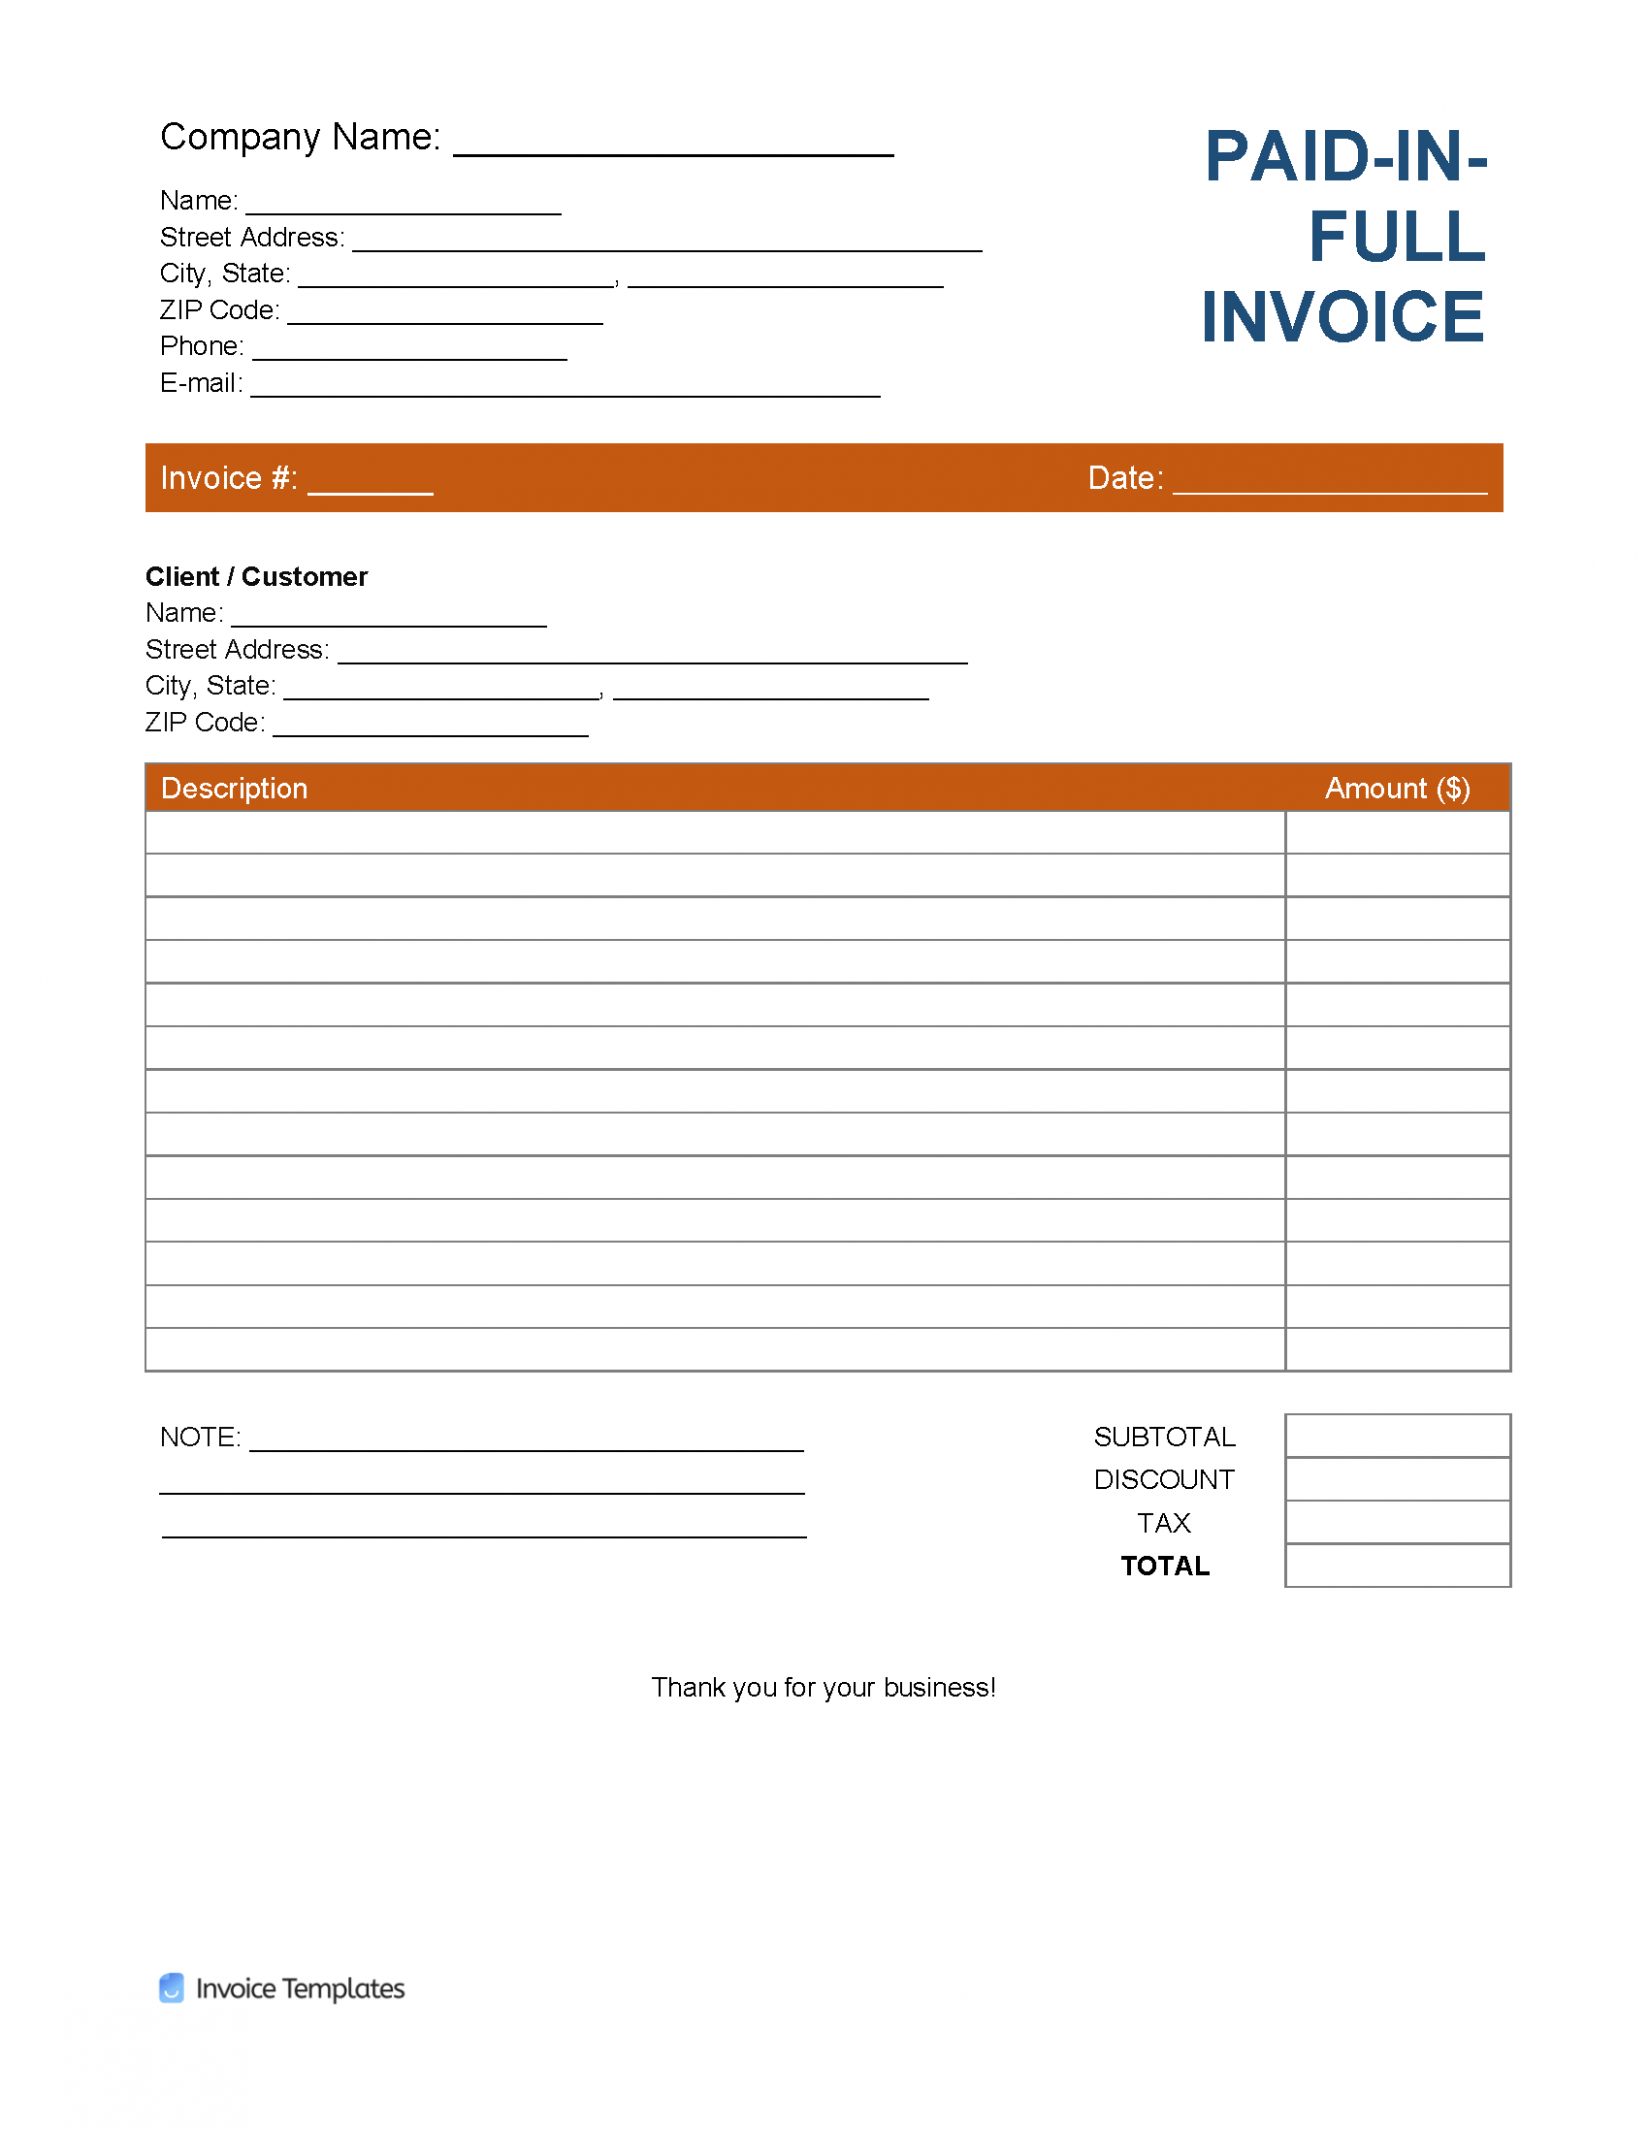 Sample Paid In Full Invoice Template 